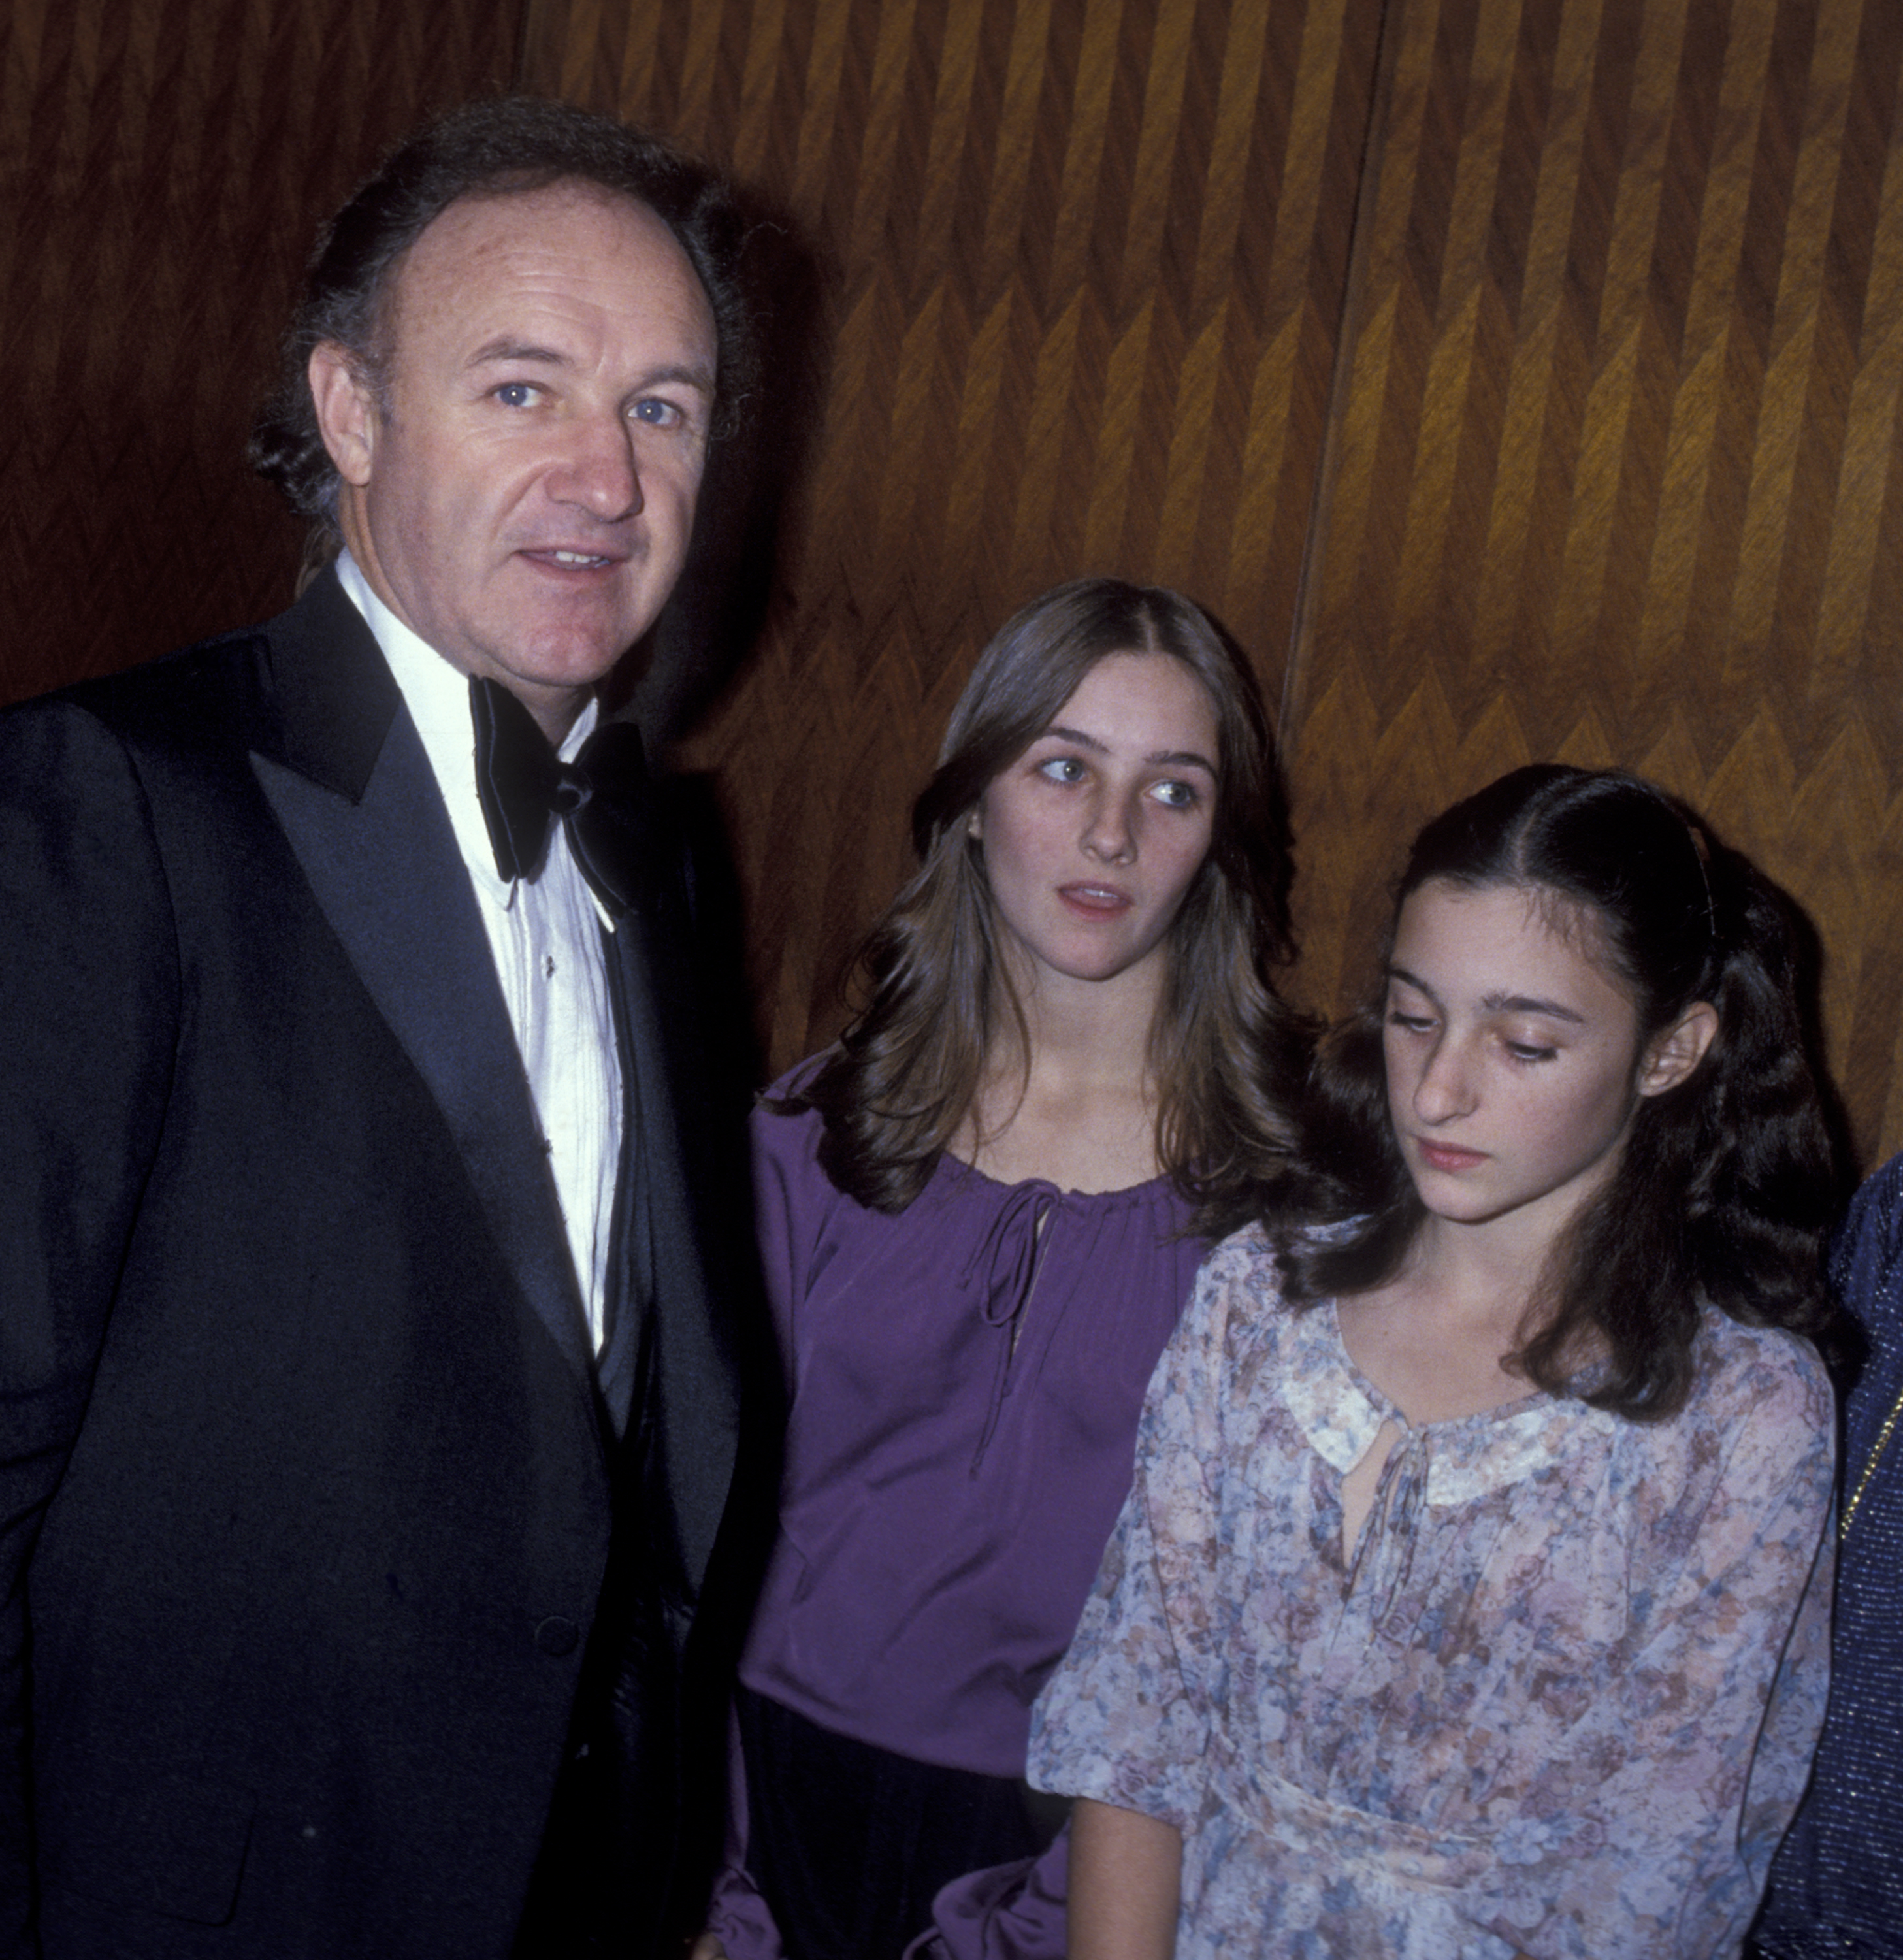 Actor Gene Hackman and daughters Elizabeth Hackman and Leslie Hackman at the screening of "Superman" on December 10, 1978, at the Kennedy Center in Washington, D.C. | Source: Getty Images